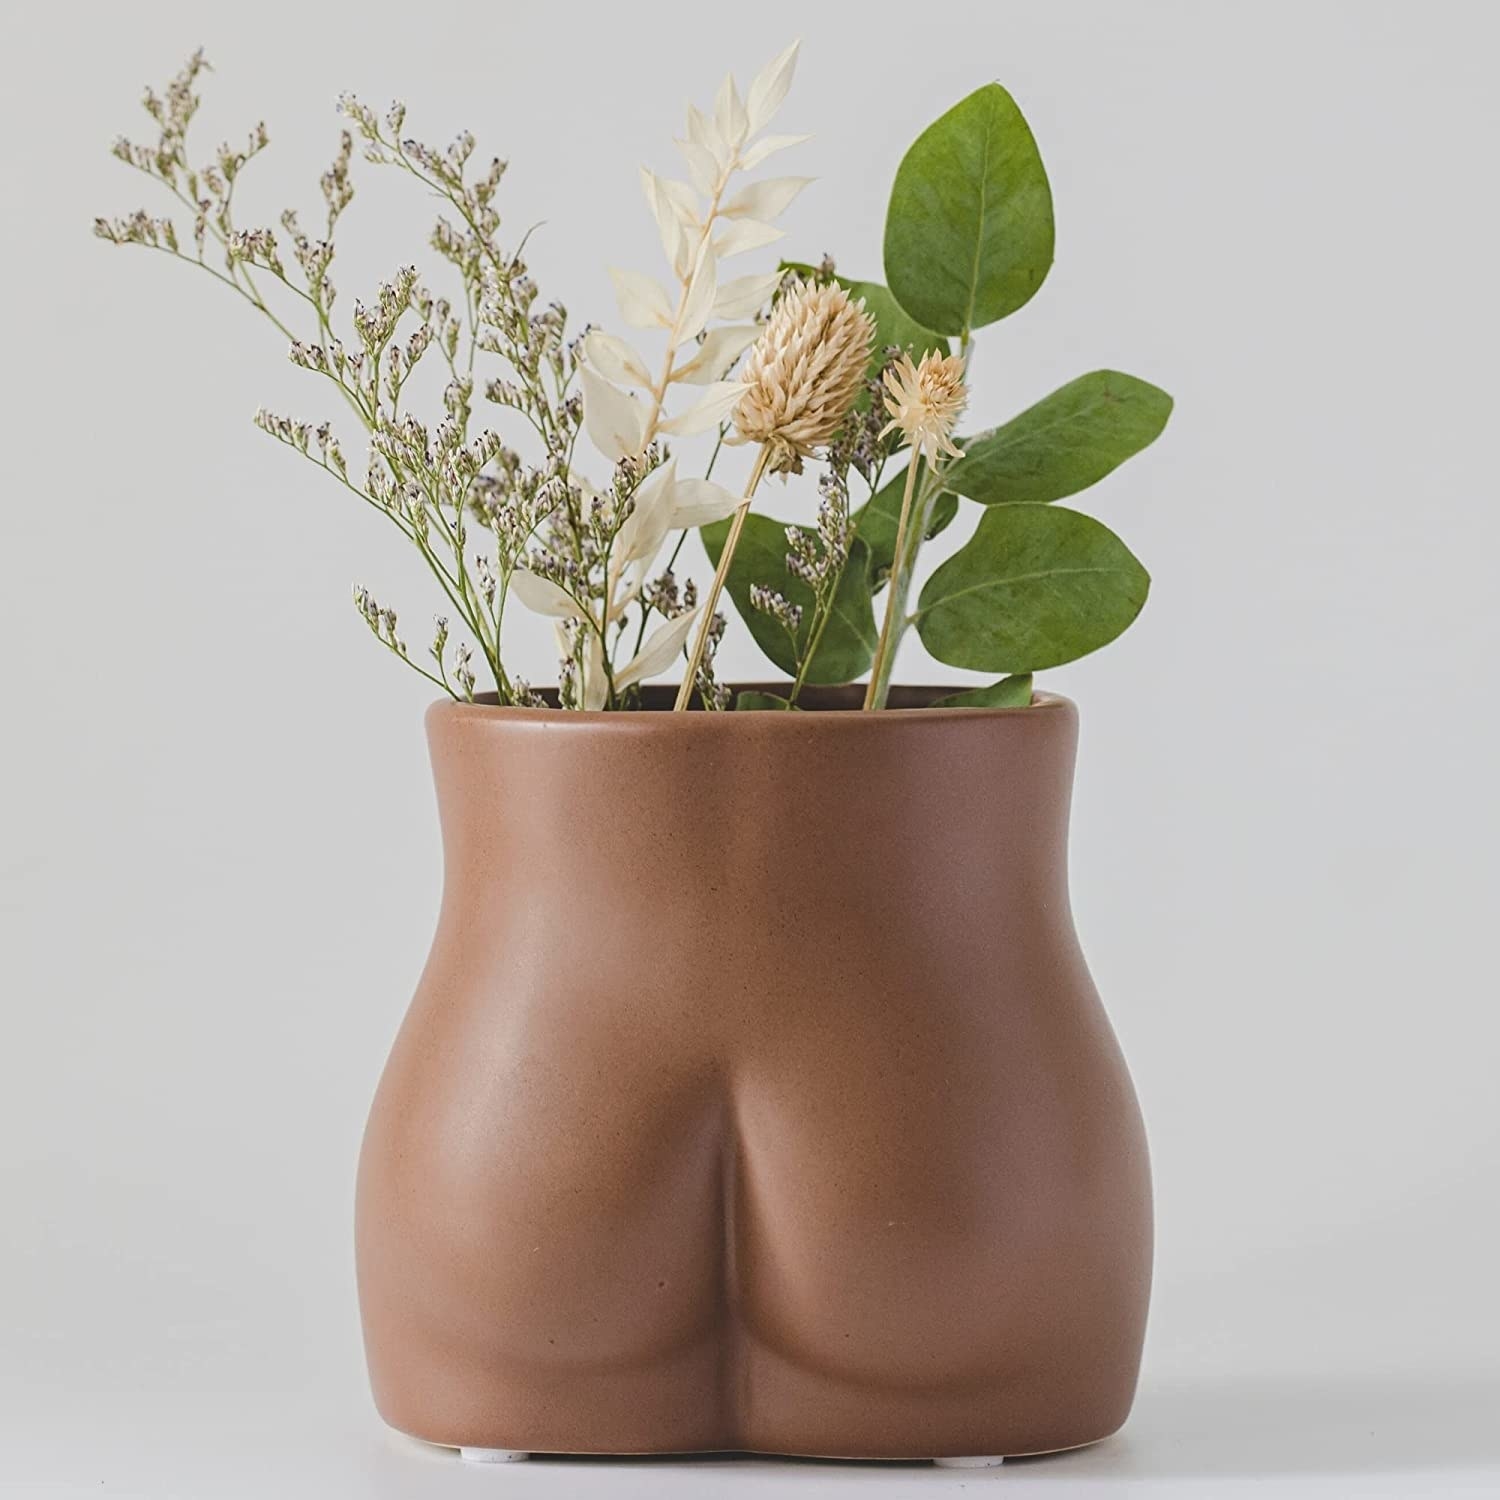 a butt-shaped planter filled with leafy sprigs